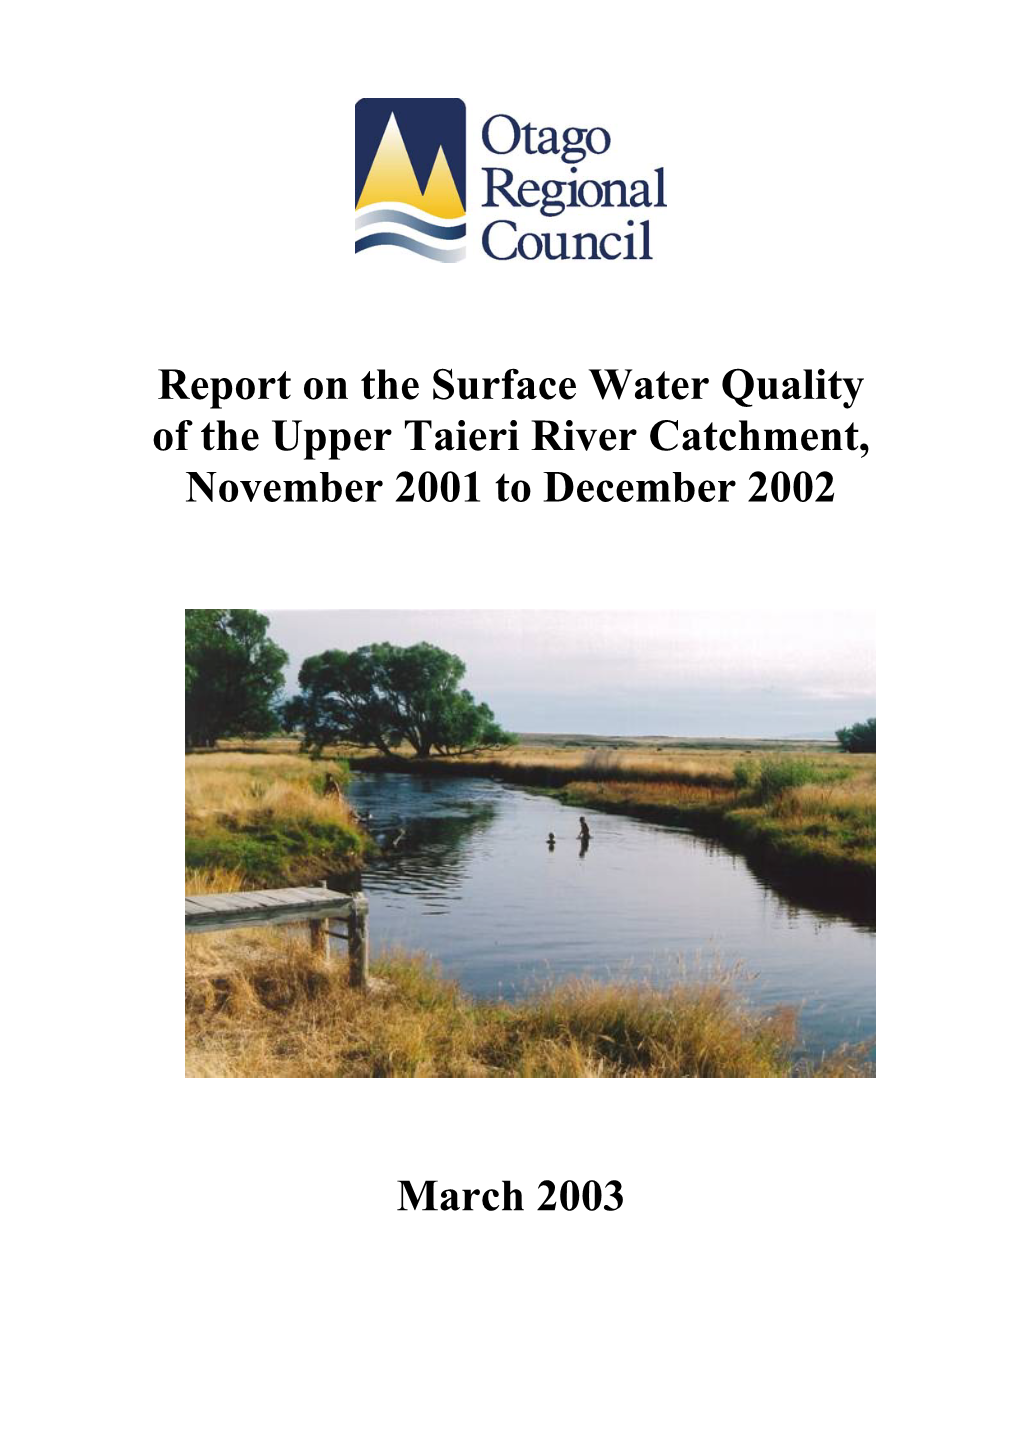 Report on the Surface Water Quality of the Upper Taieri River Catchment, November 2001 to December 2002